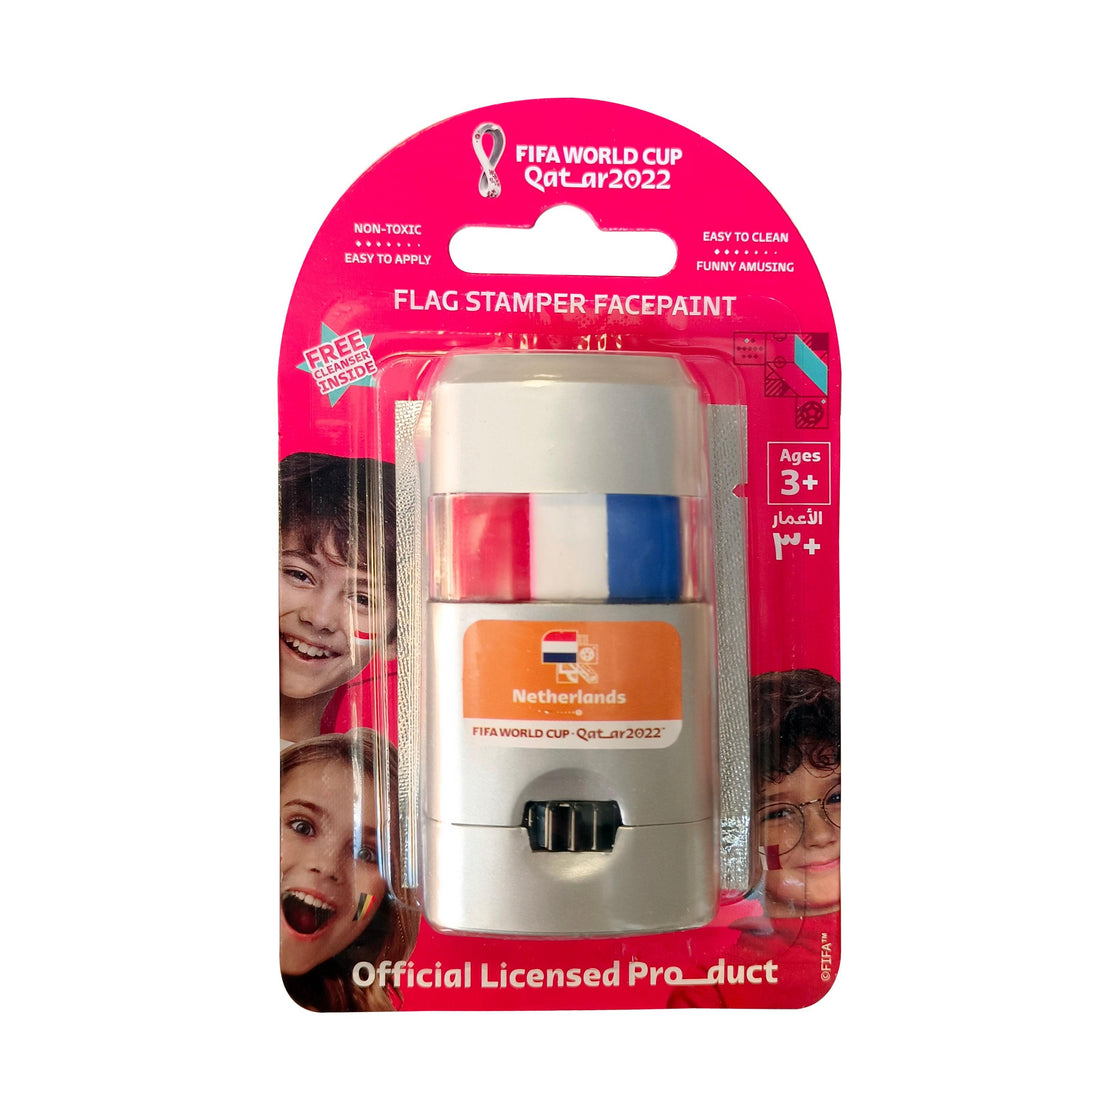  FIFA Flag Stamper Non Toxic | Flag Stamper Face paint with free removing cream - NETHERLANDS - My Little Thieves